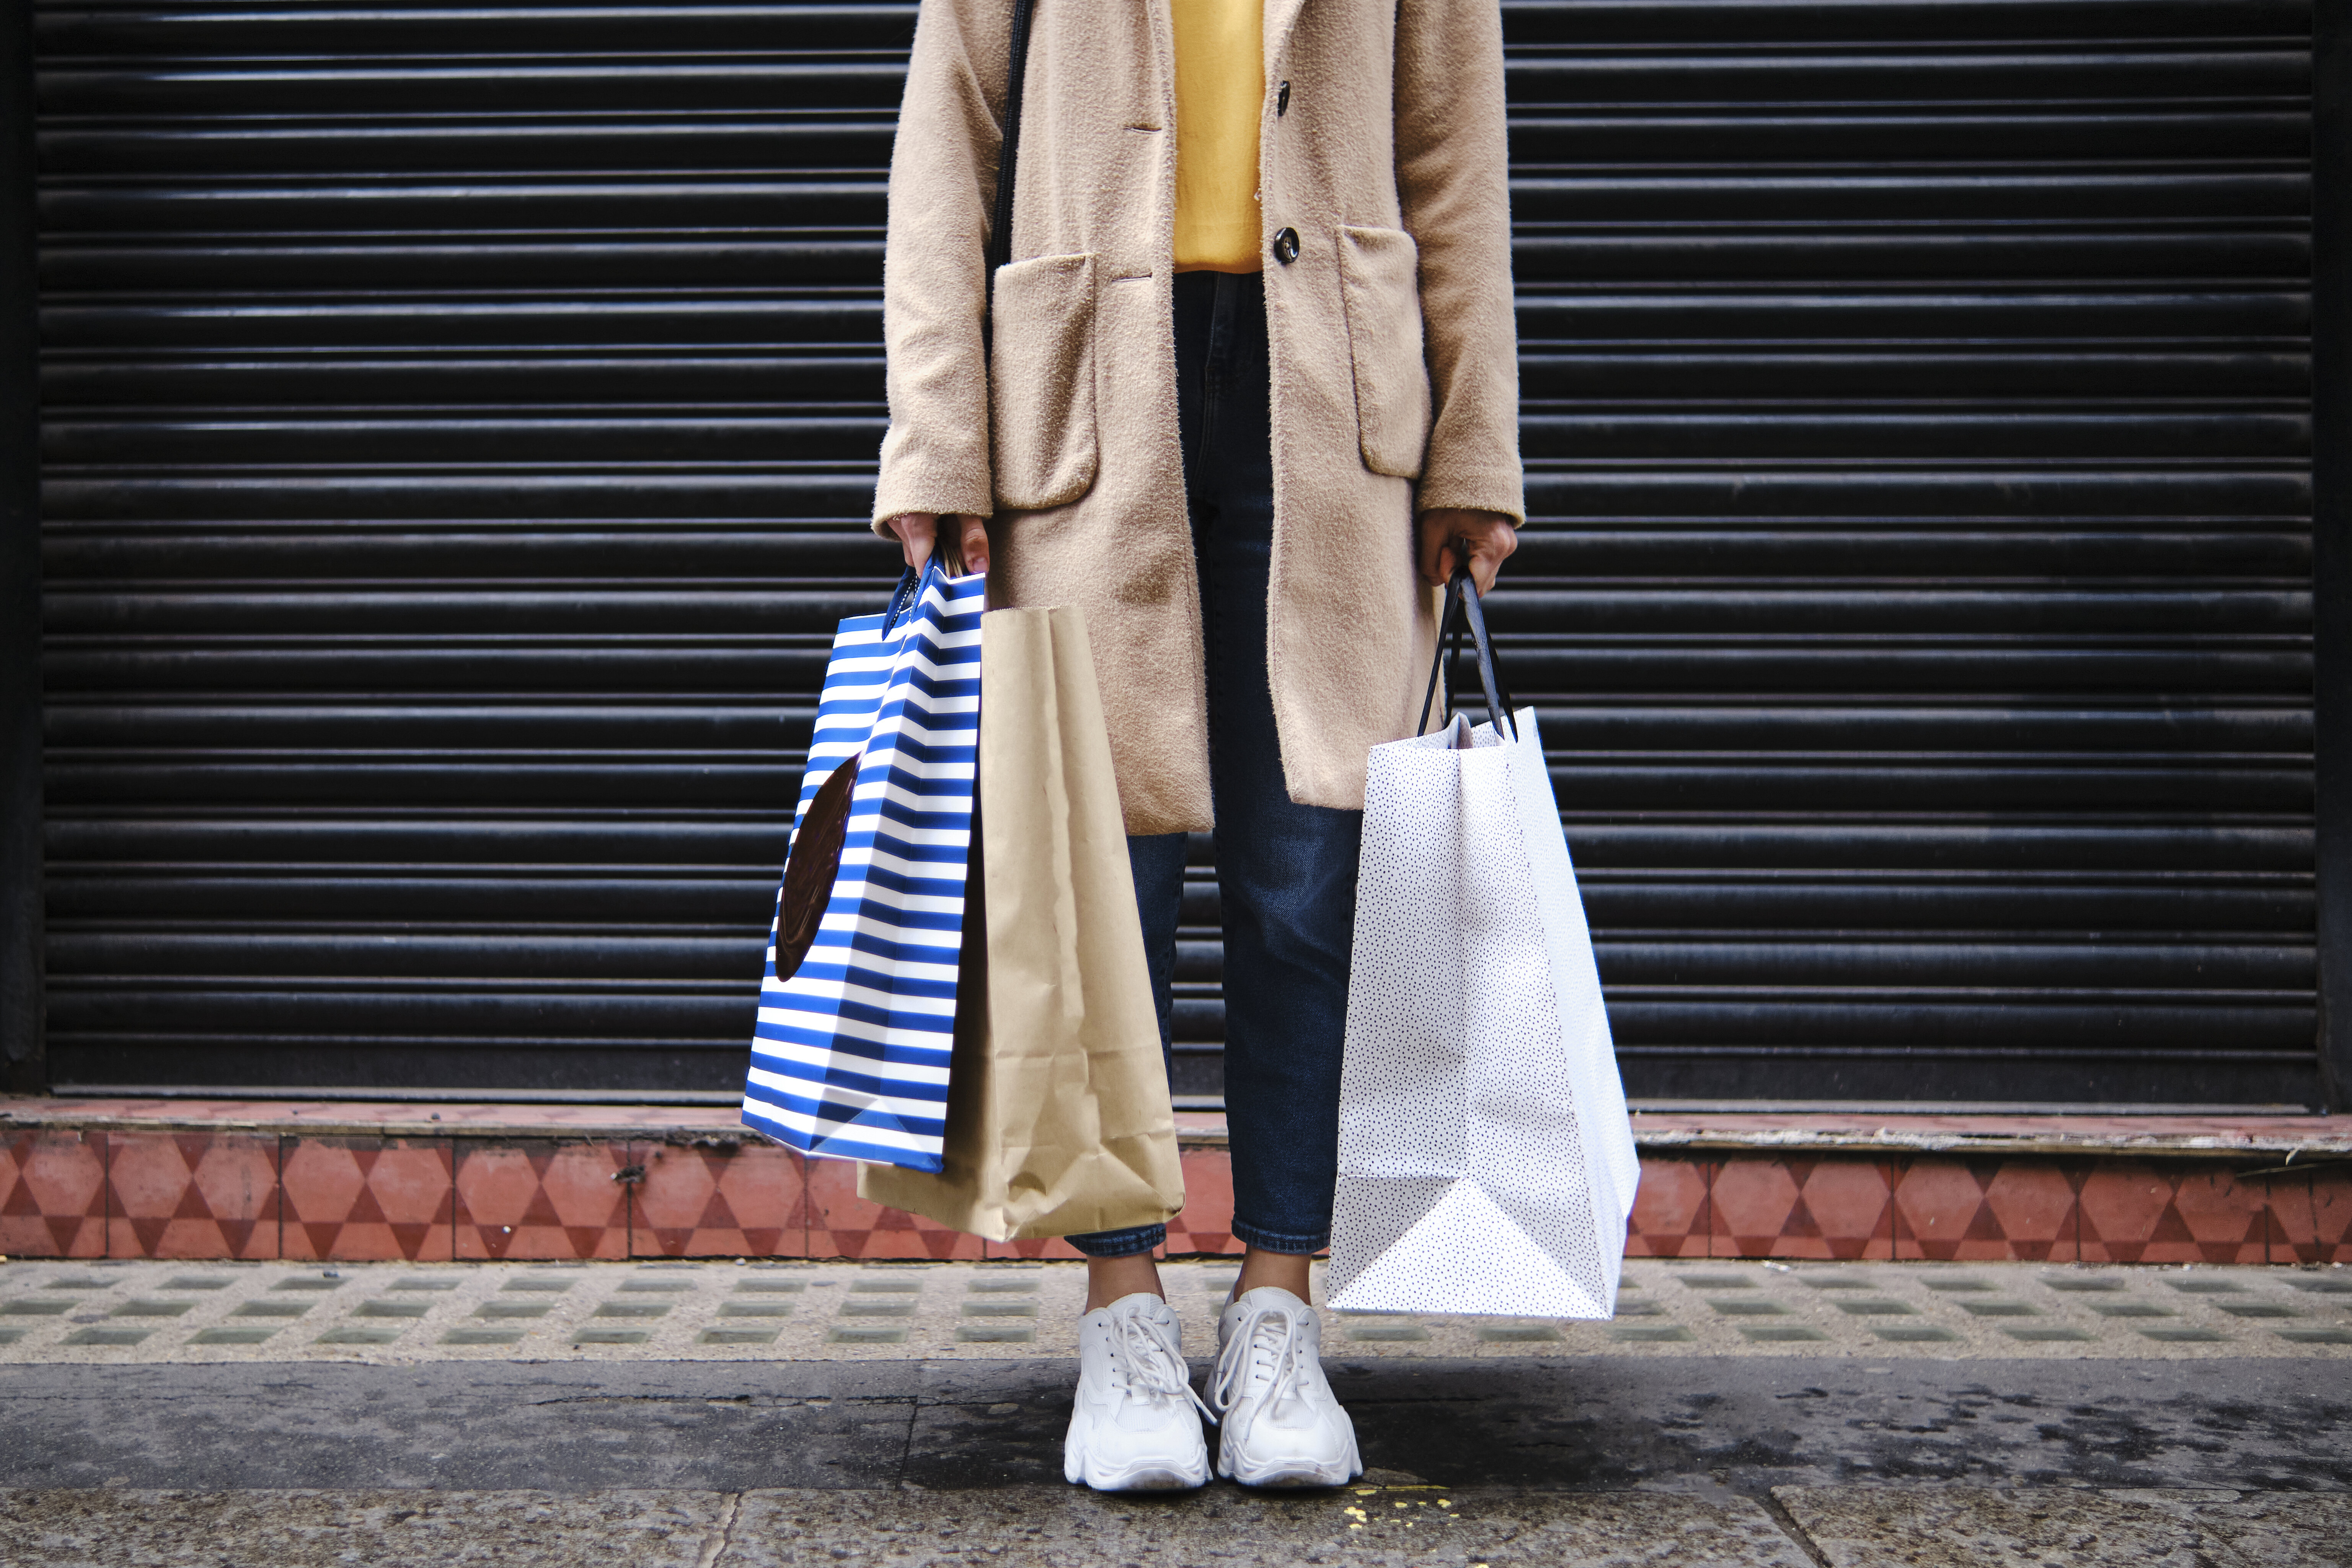 Person standing with shopping bags, wearing a coat, jeans, and sneakers, in front of a shuttered store